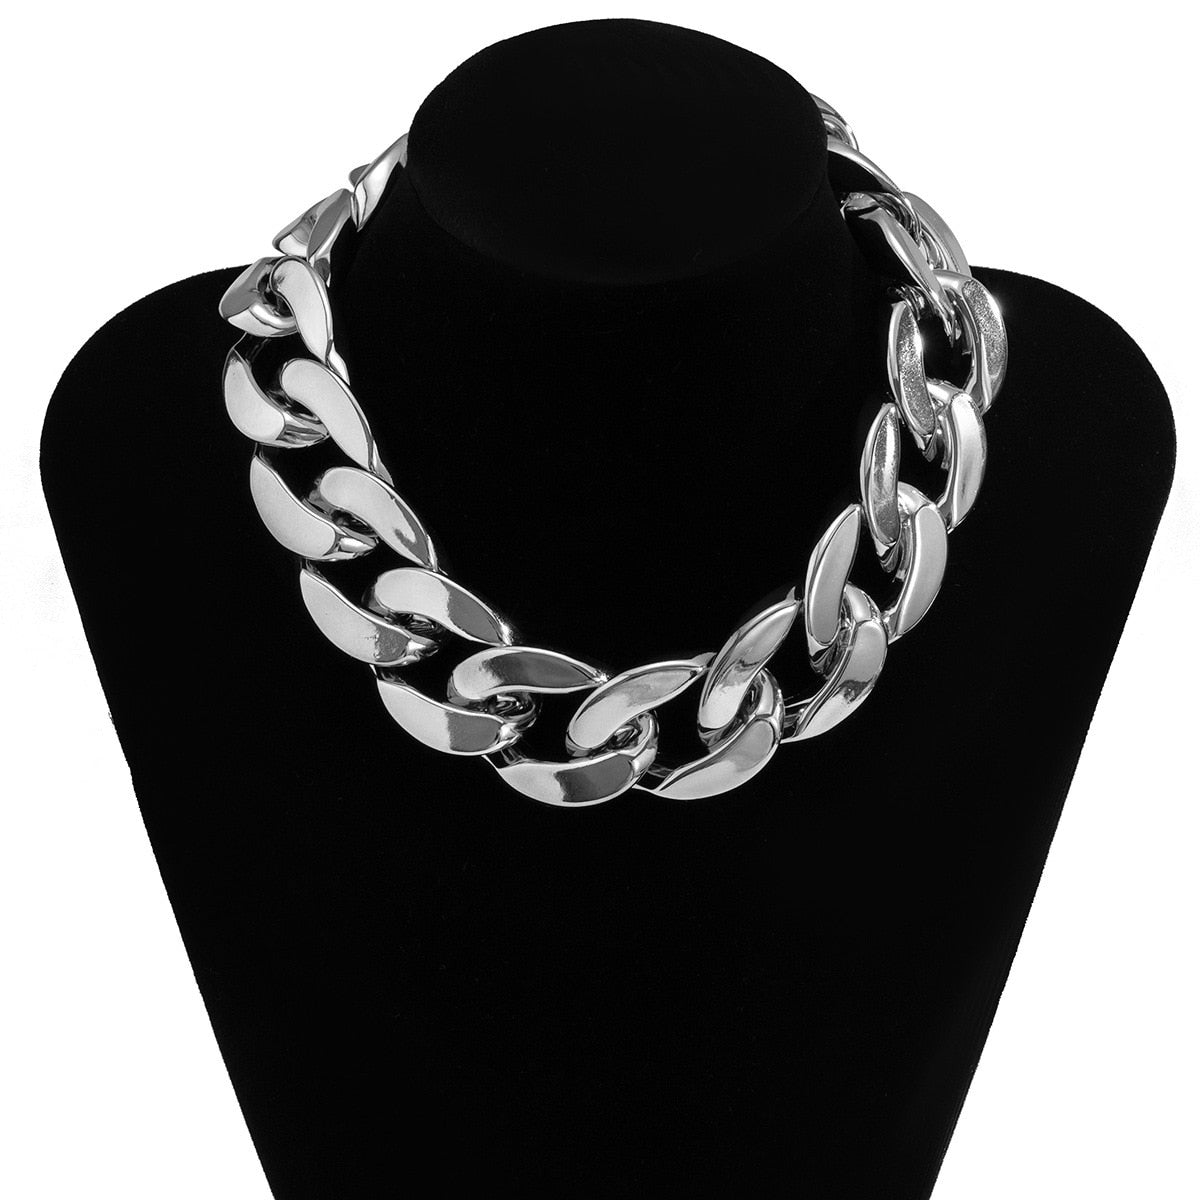 Thick-Chain Fashion Glamour Jewelry